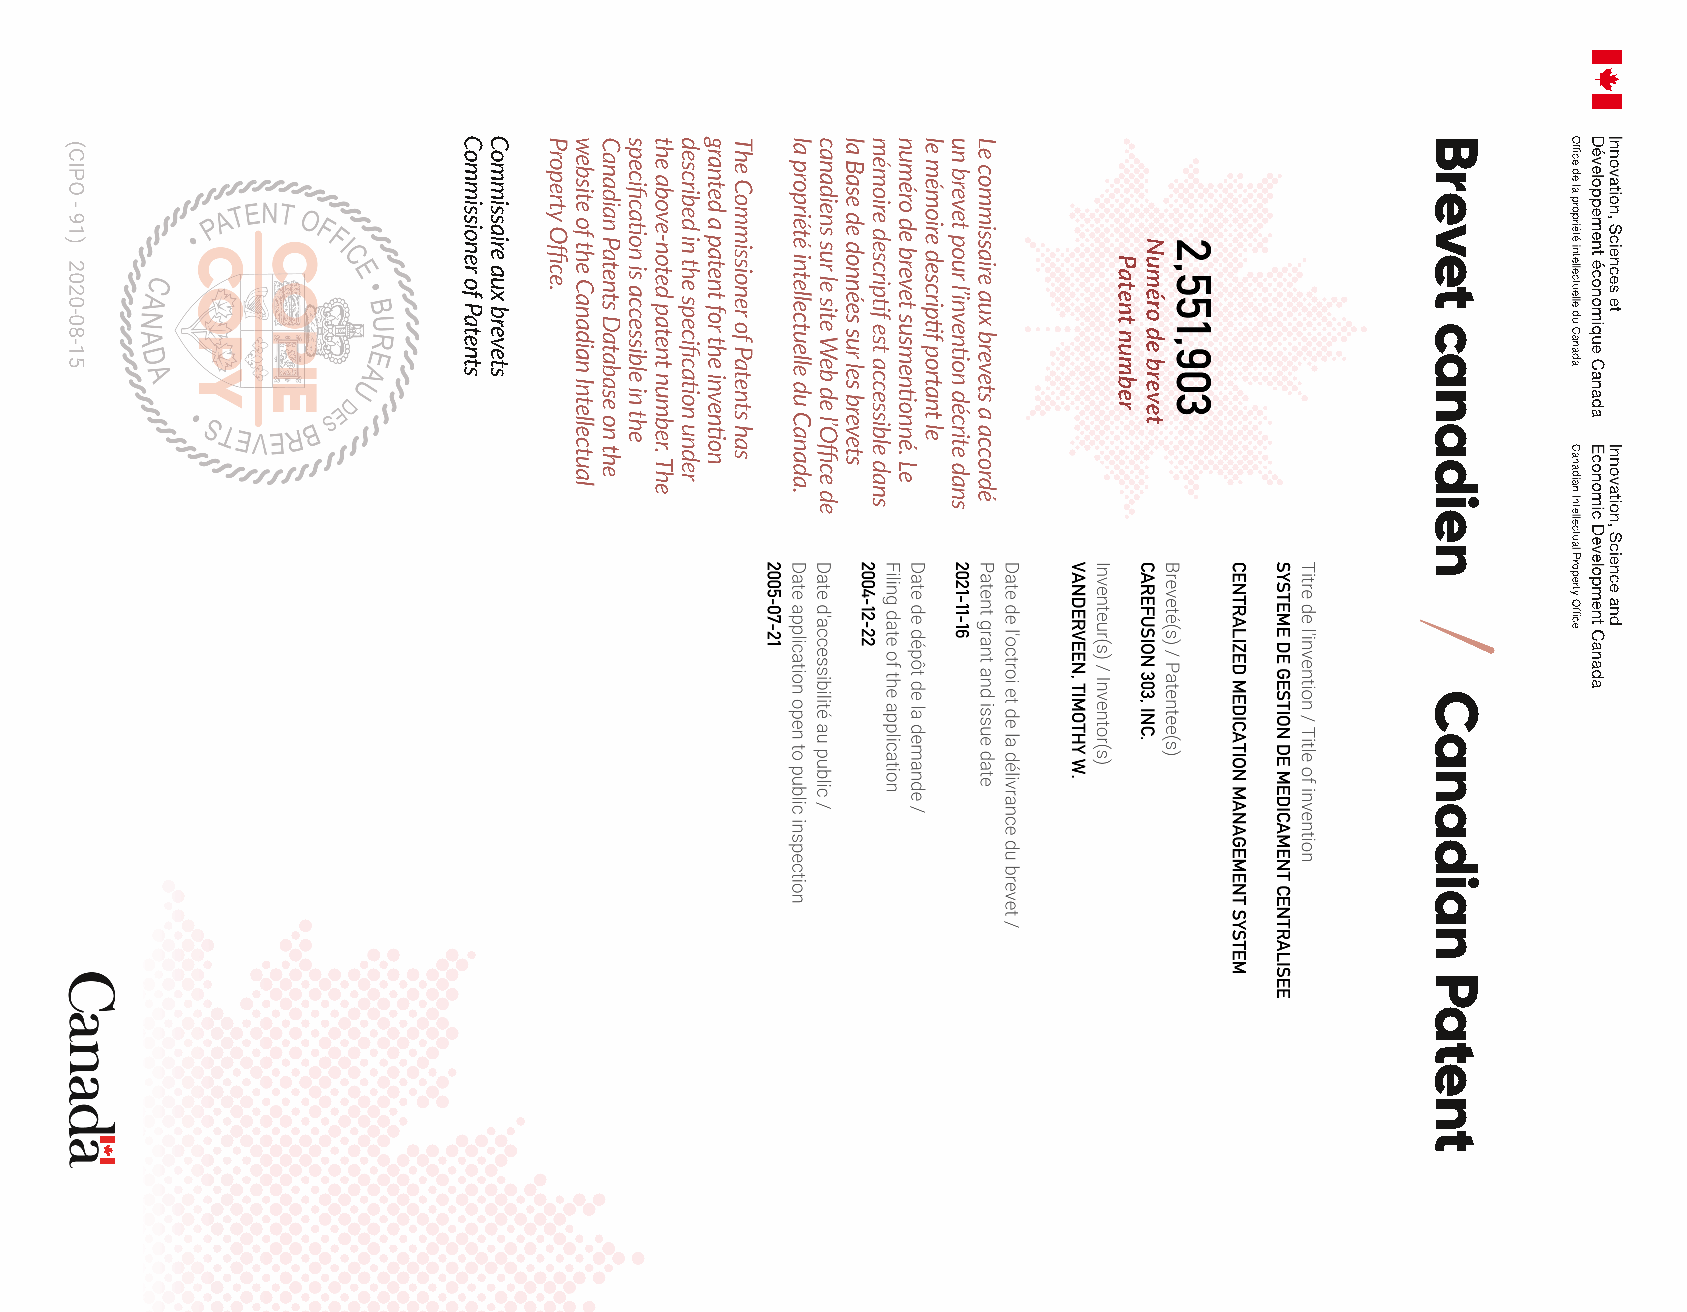 Canadian Patent Document 2551903. Electronic Grant Certificate 20211116. Image 1 of 1